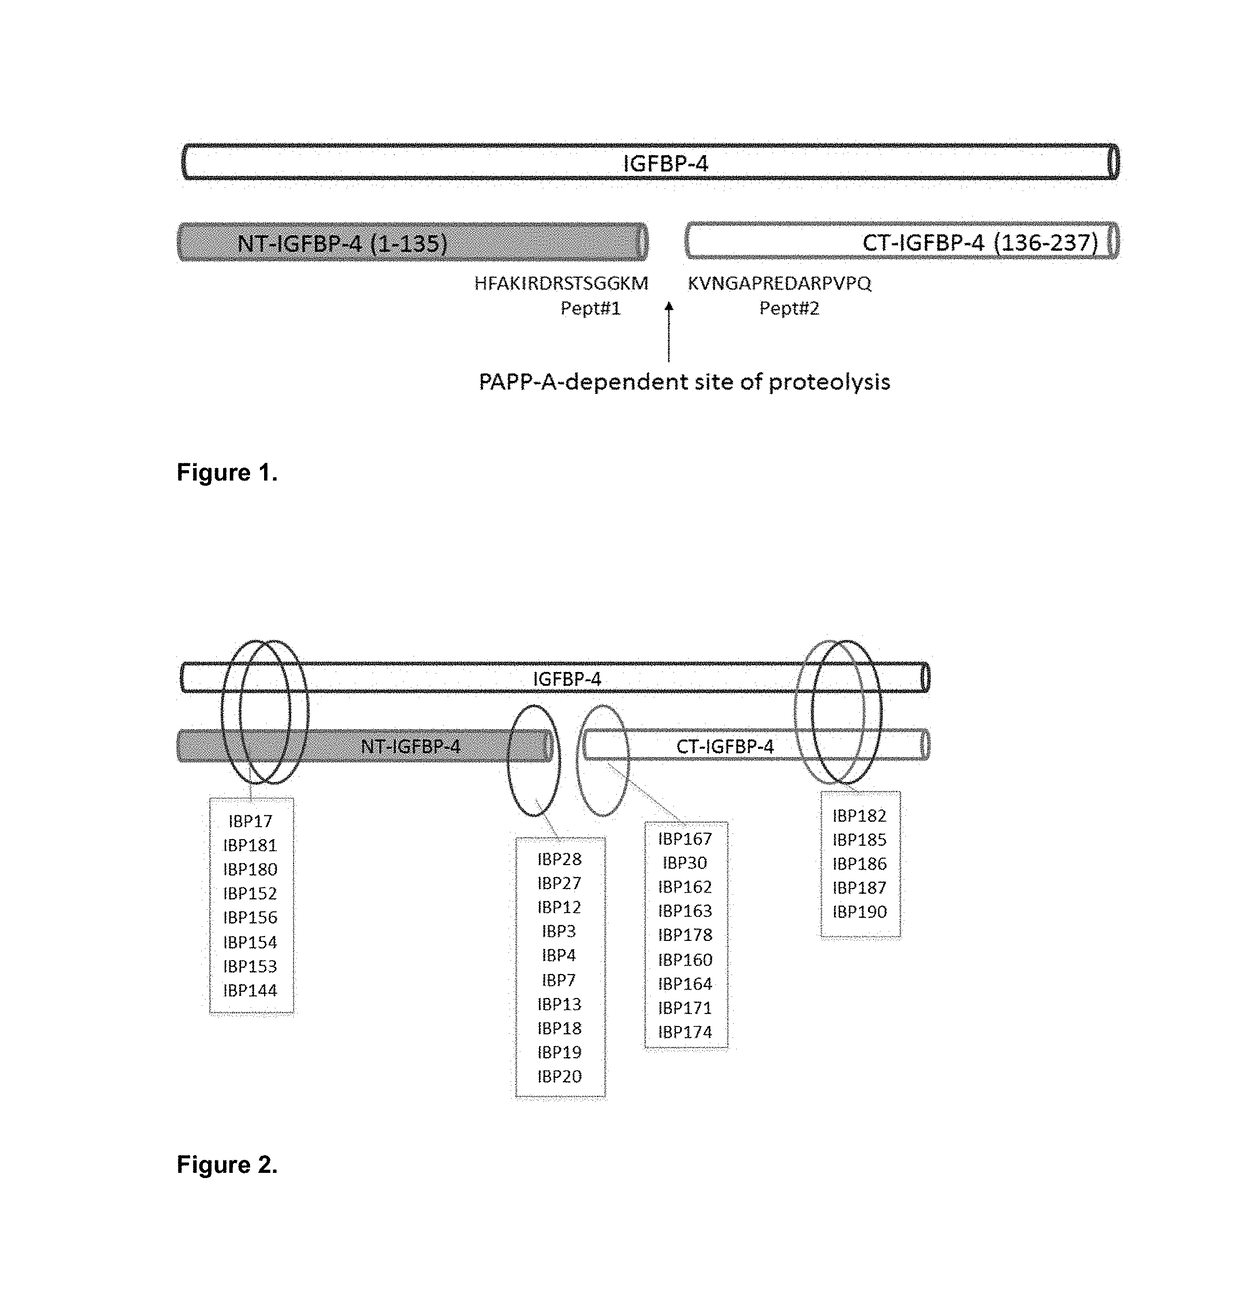 Method for determining the risk of cardiovascular events using IGFBP fragments